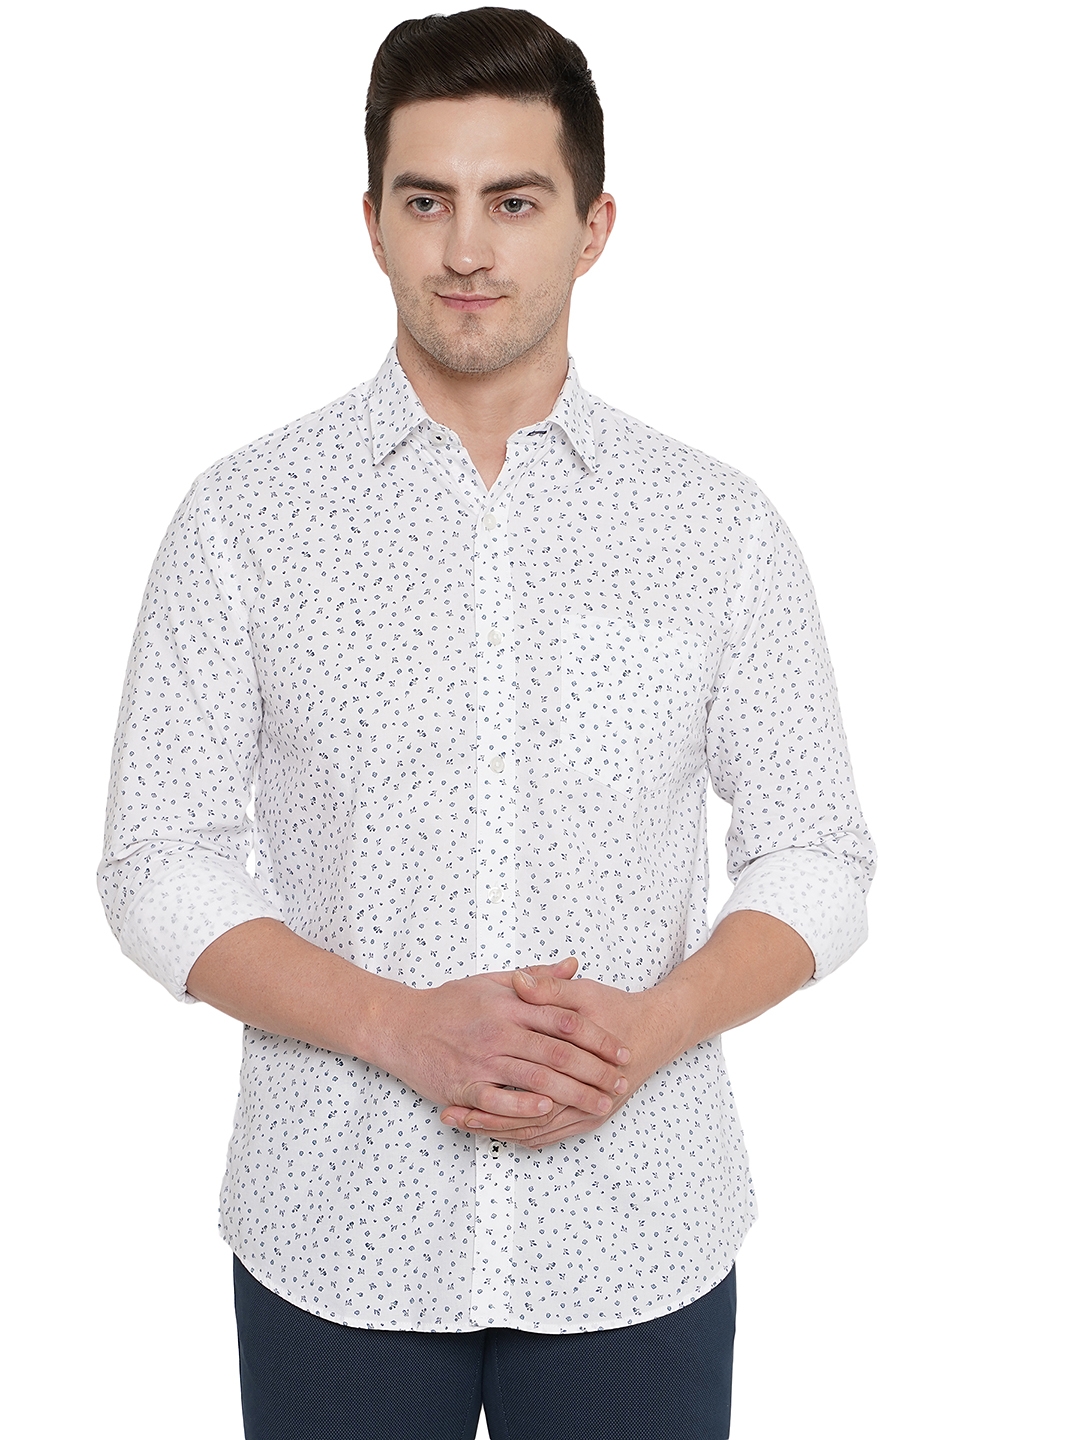 Greenfibre | White Printed Smart Fit Casual Shirt | Greenfibre 0